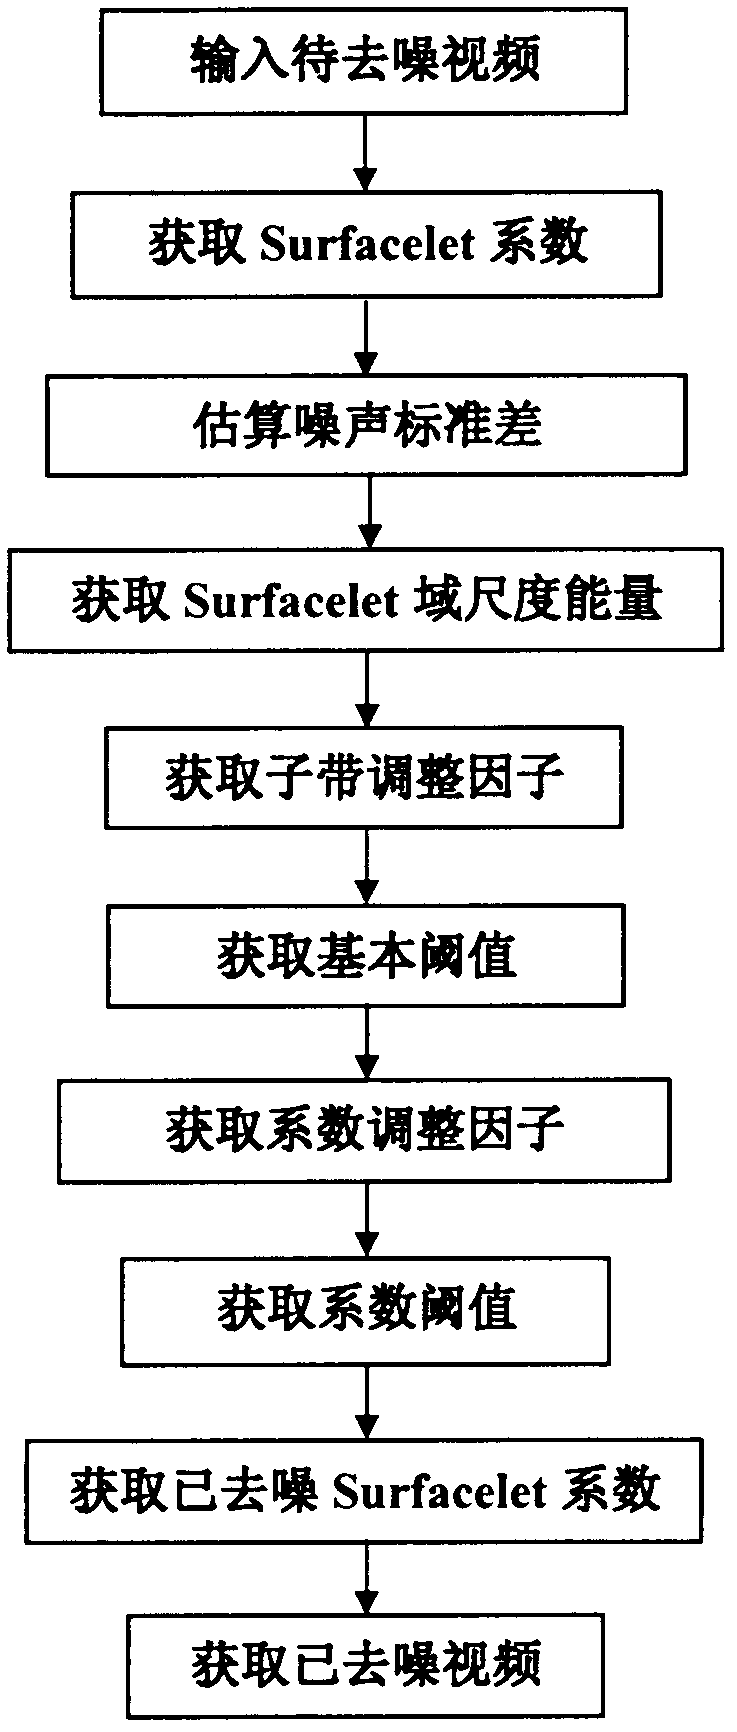 Method for denoising video based on surfacelet conversion characteristic